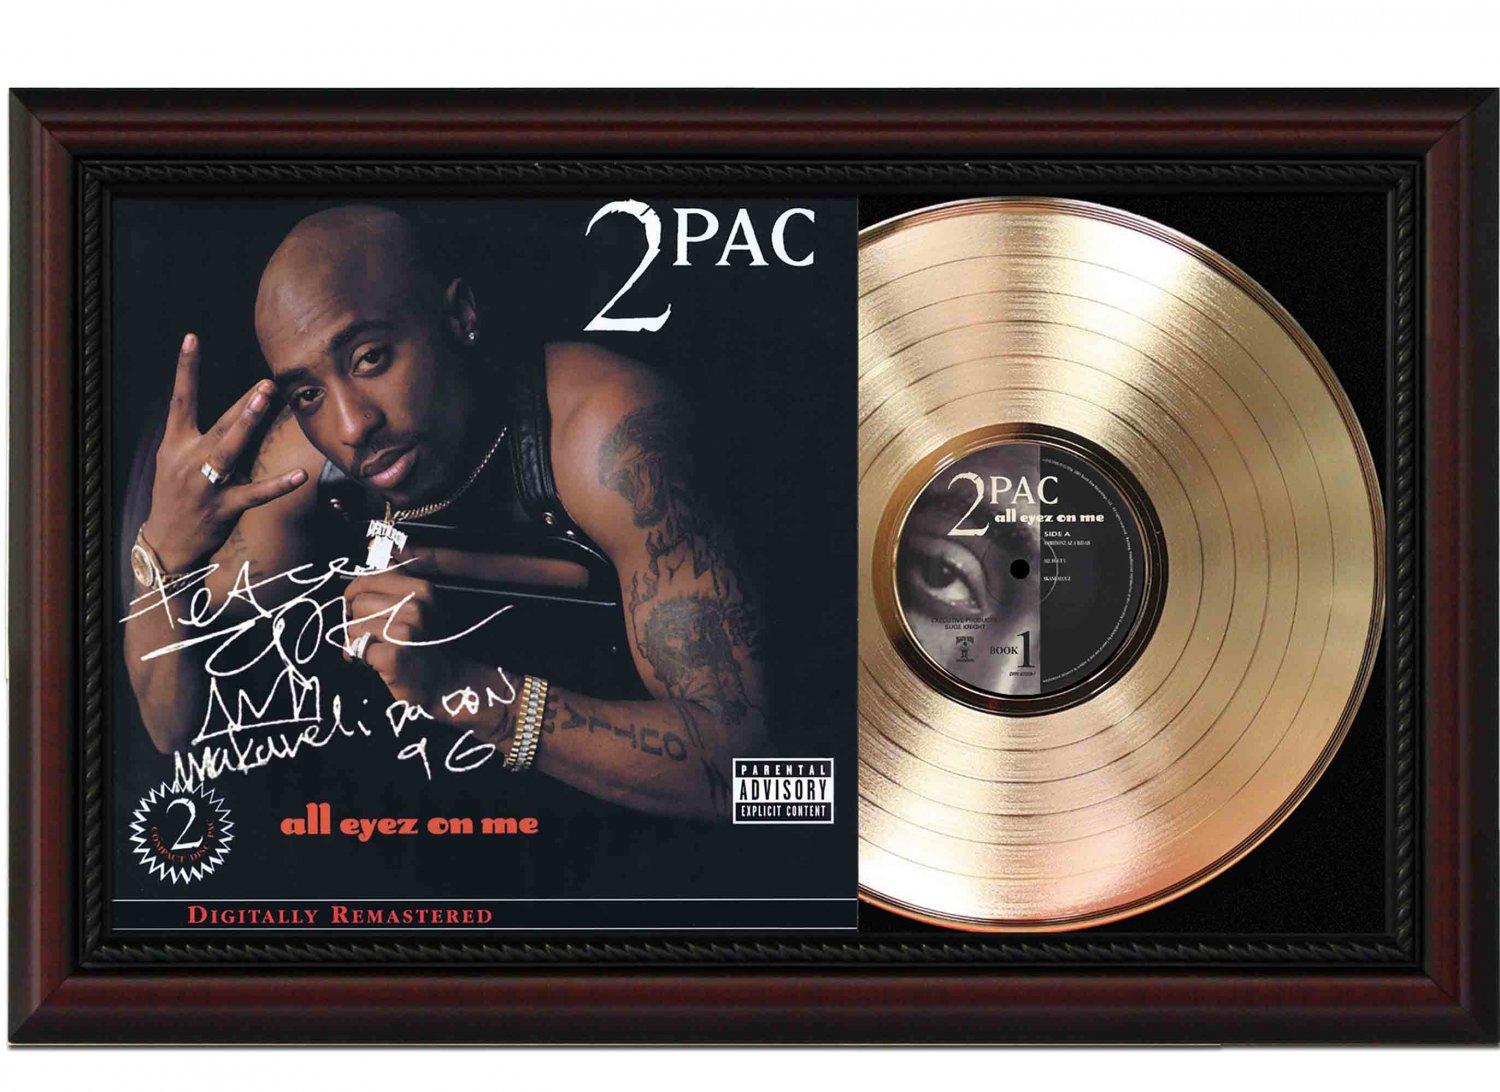 2 Pac "All Eyez On Me" Framed Record Display.